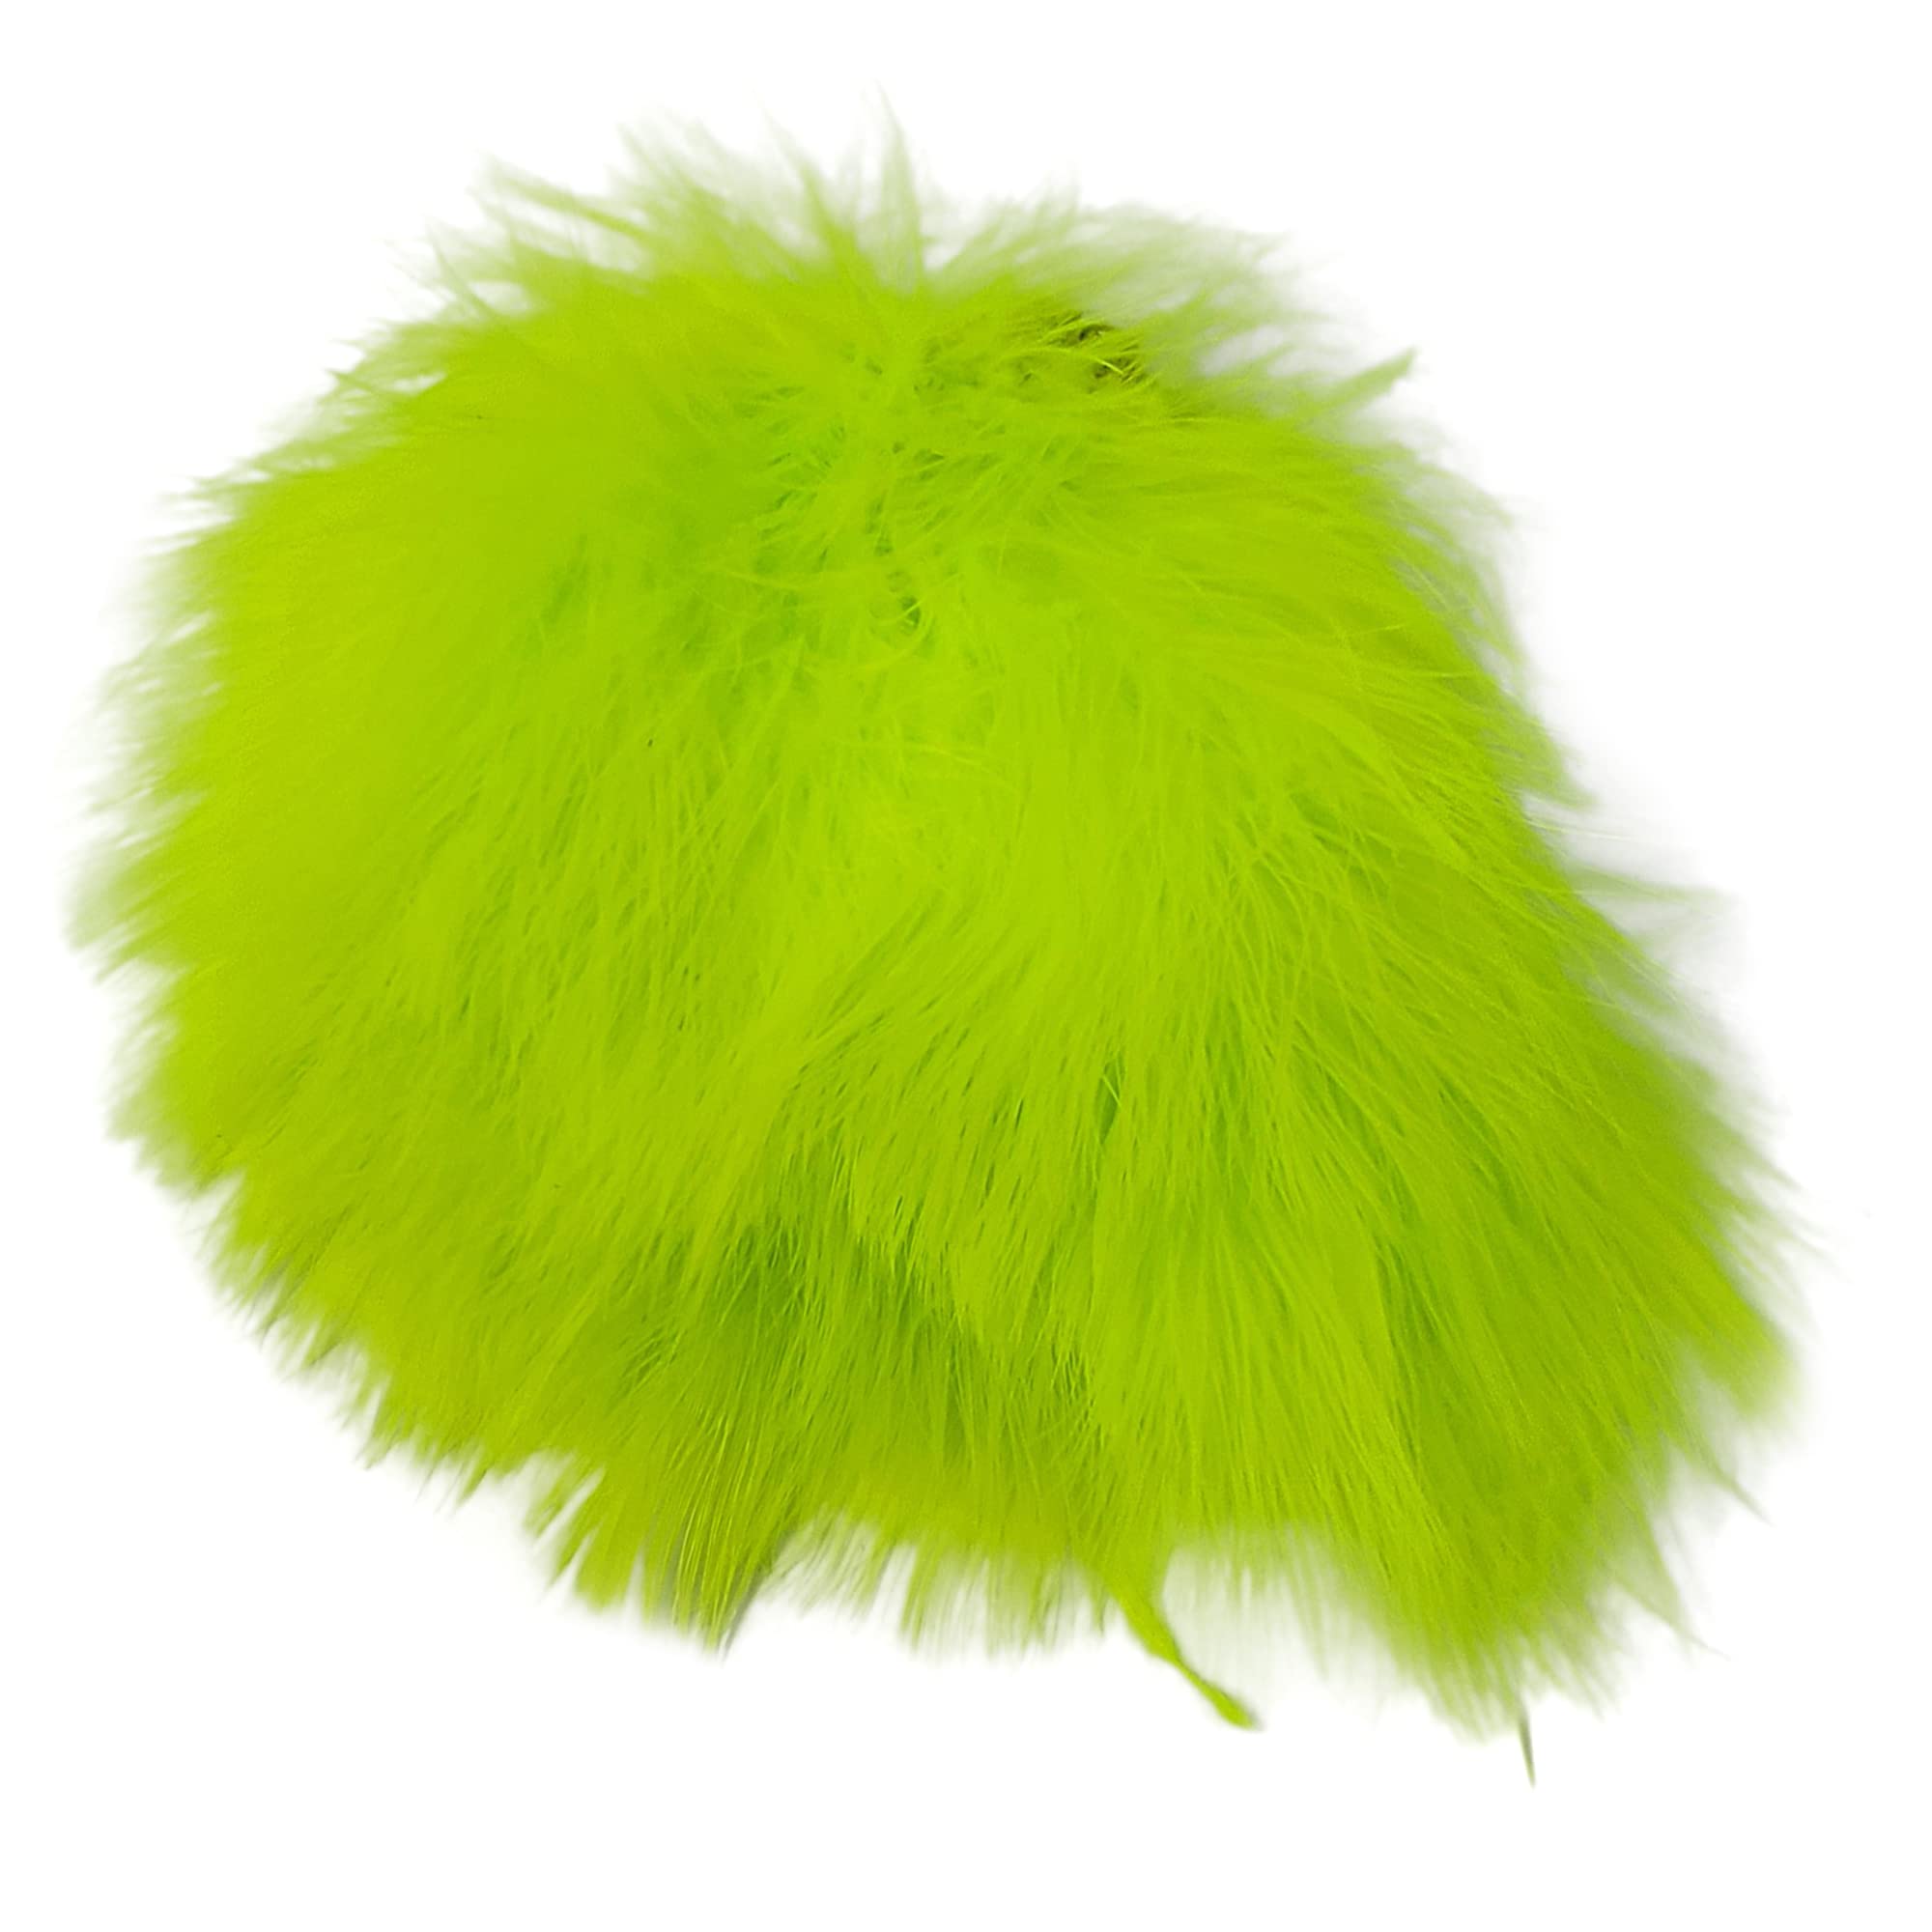 Creative Angler Strung Marabou Bird Feathers for Tying Fly Fishing Flies -  Fly Tying Accessories - Perfect Choice for Tail & Wings and Easy to Tie,  Marabou Feathers Fly Tying 